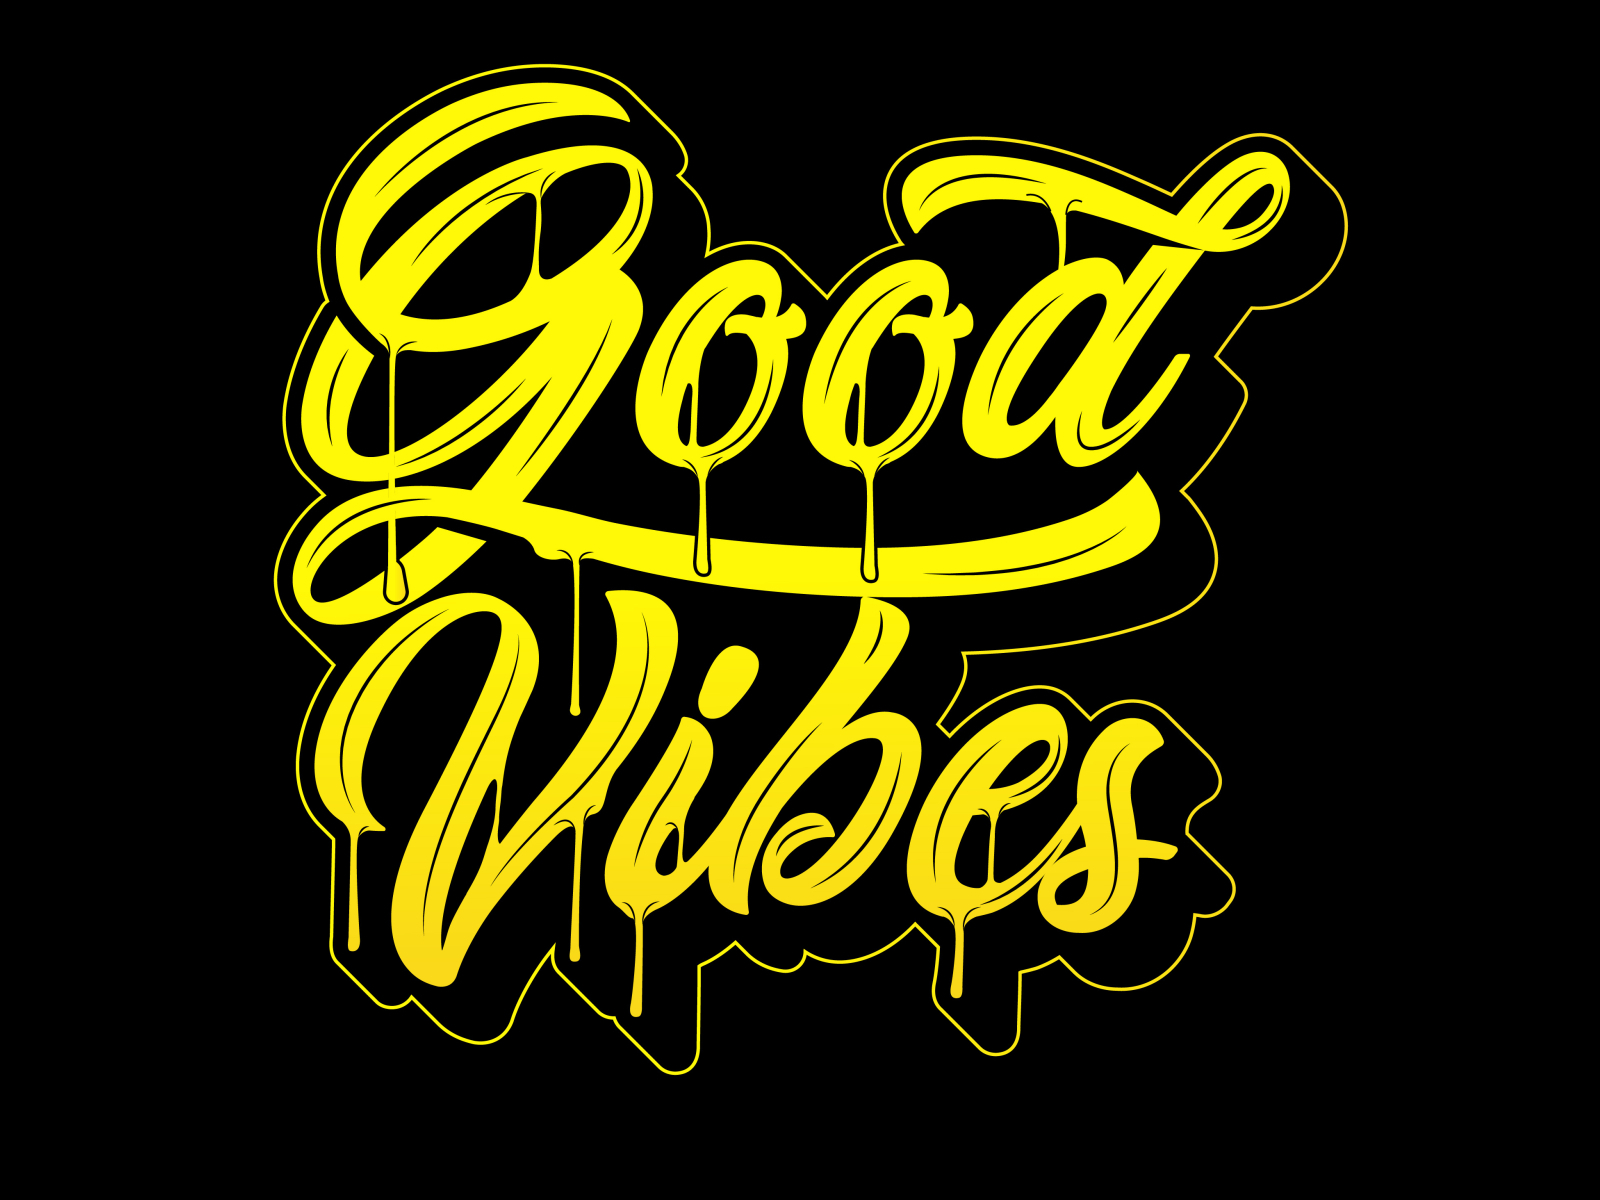 Good vibes by MD Kawsar on Dribbble